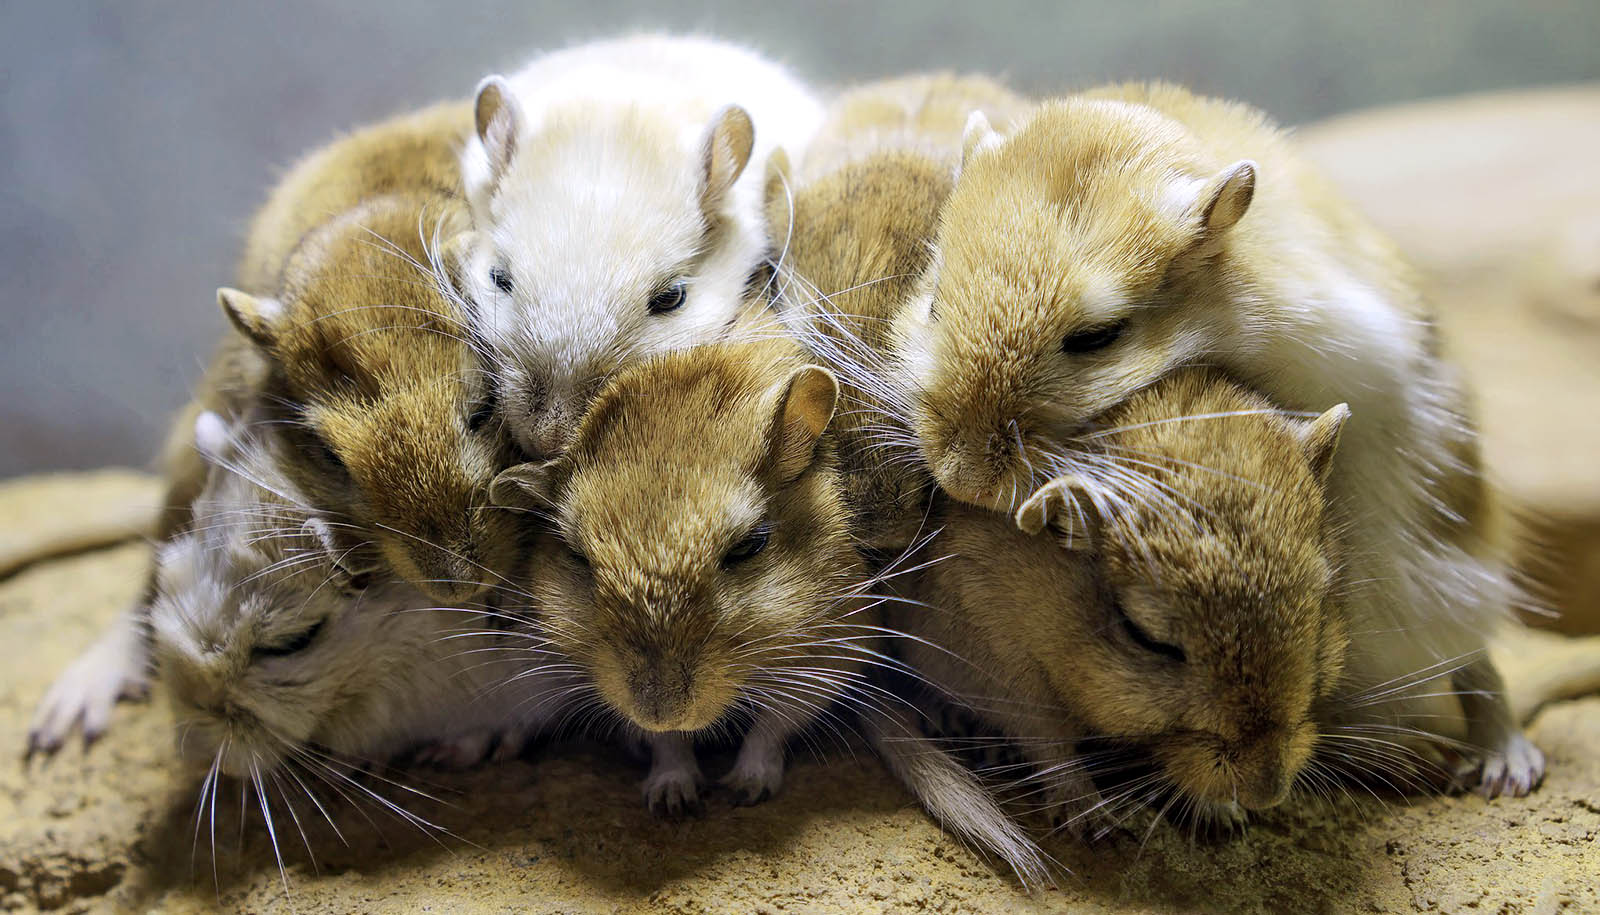 Testosterone gets gerbils to cuddle, not just fight